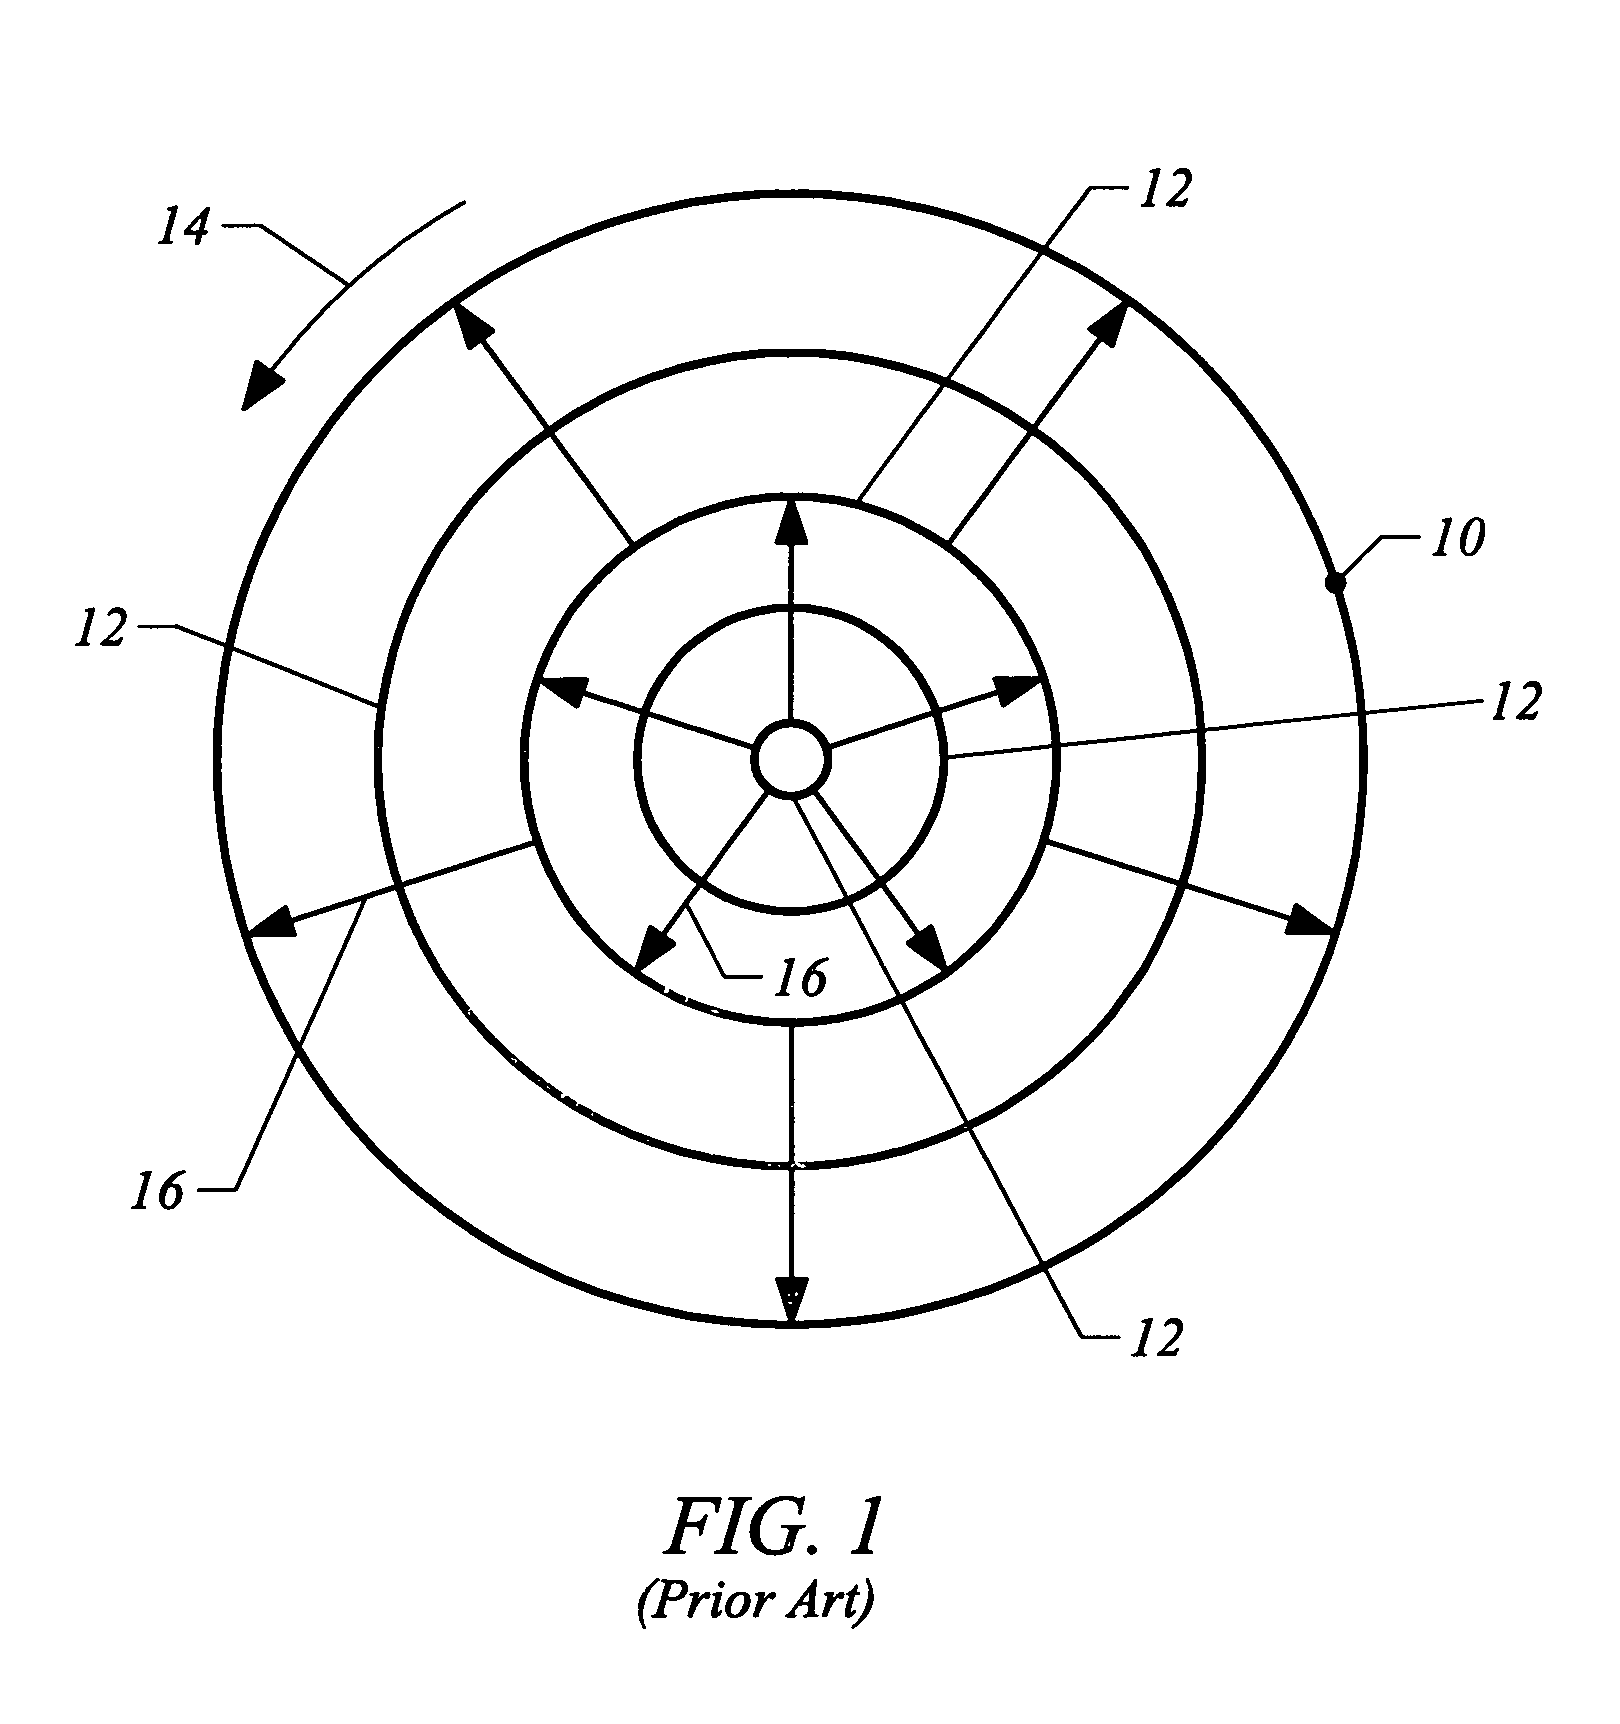 Method and apparatus for drying semiconductor wafer surfaces using a plurality of inlets and outlets held in close proximity to the wafer surfaces